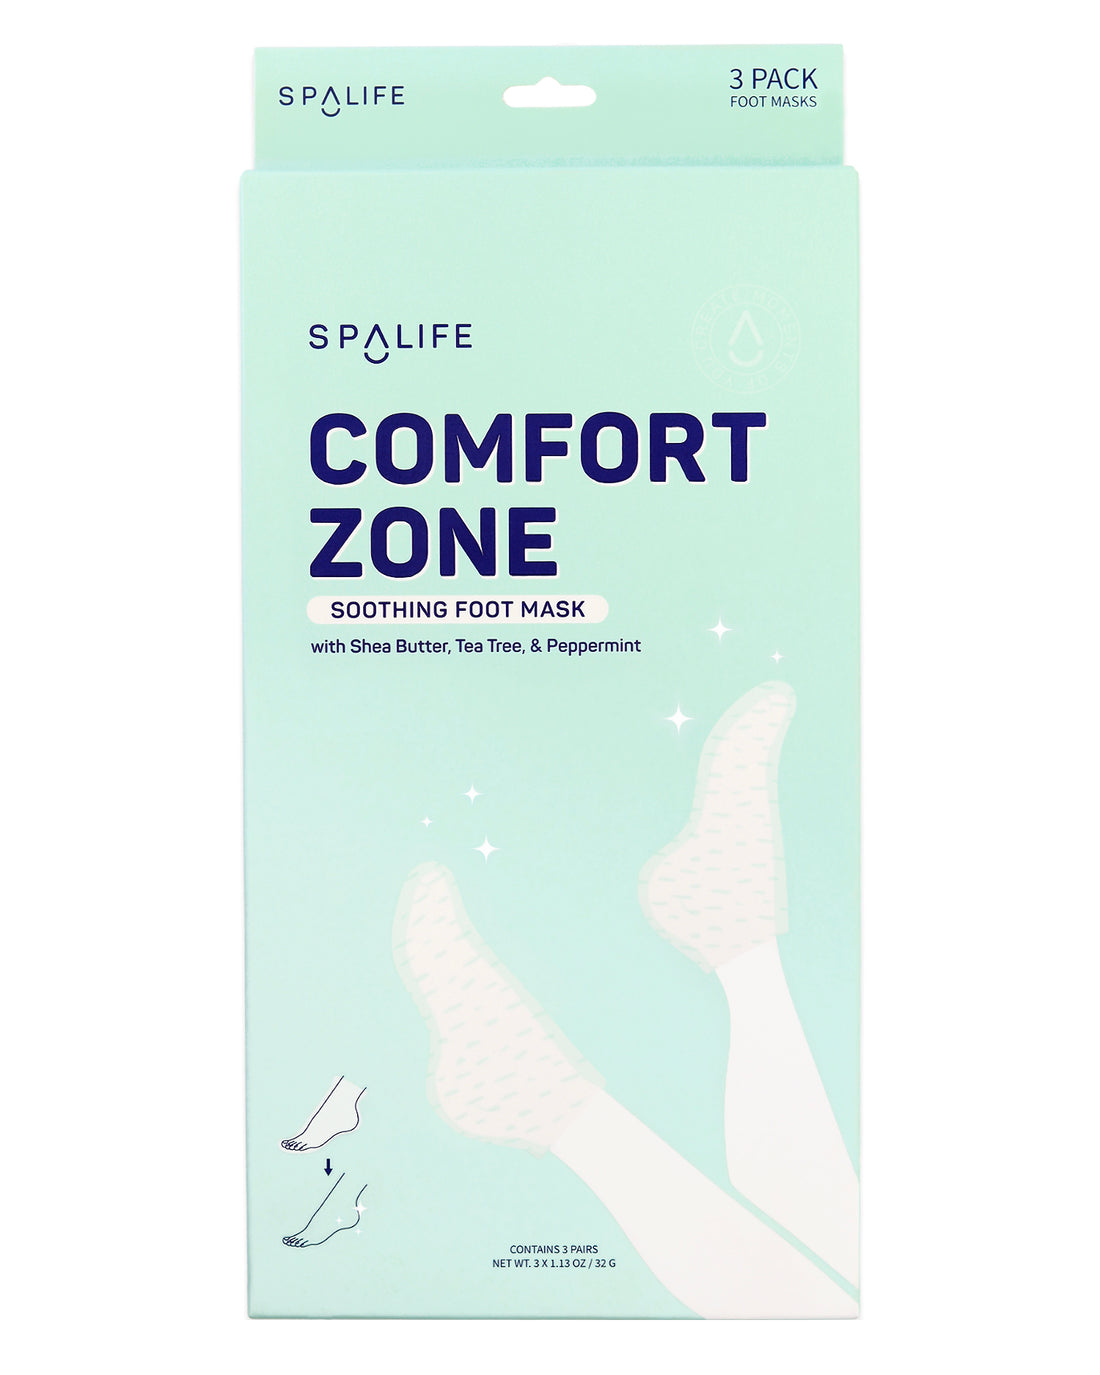 Comfort_zone_soothing_foot_mas-992